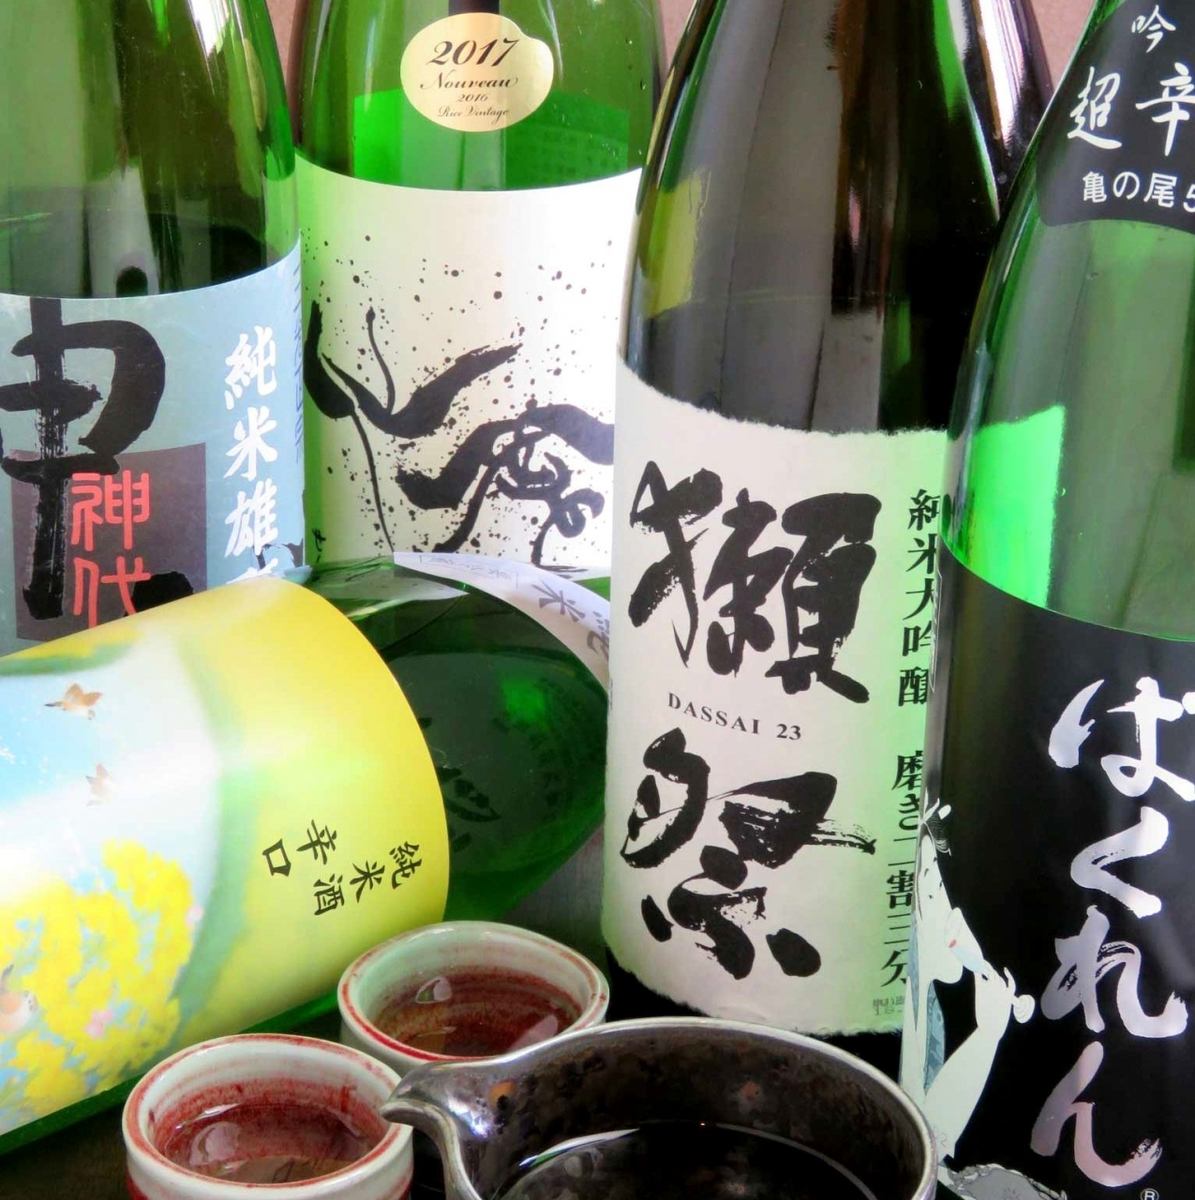 We have a wide variety of national brands and local sake! You can enjoy it to your heart's content after work♪